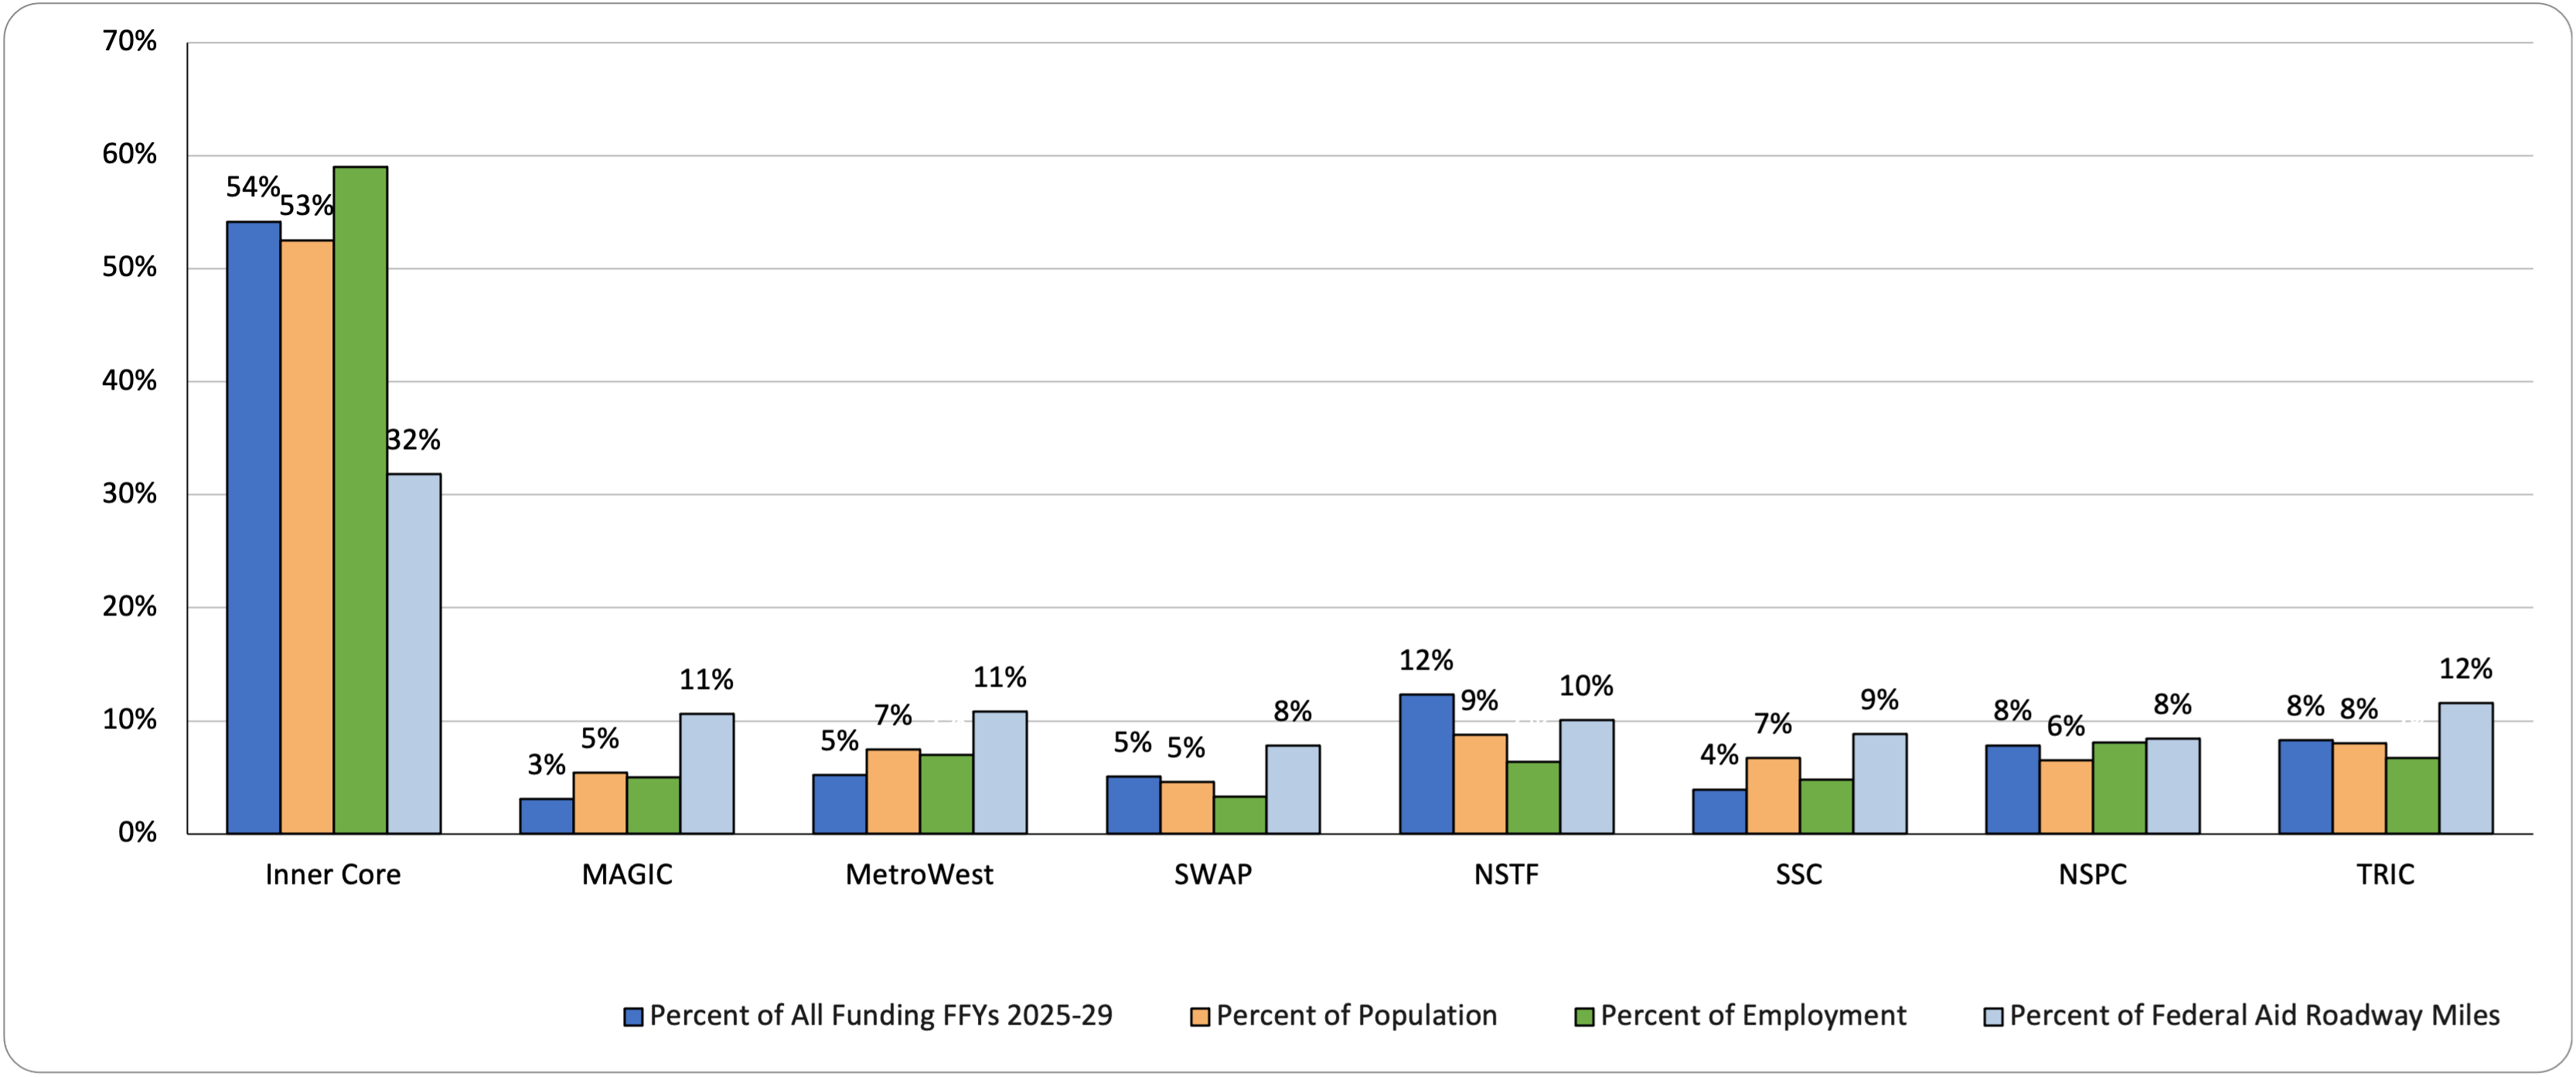 A chart showing the distribution of all federal funding by MAPC subregion across fiscal years 2025-2029.